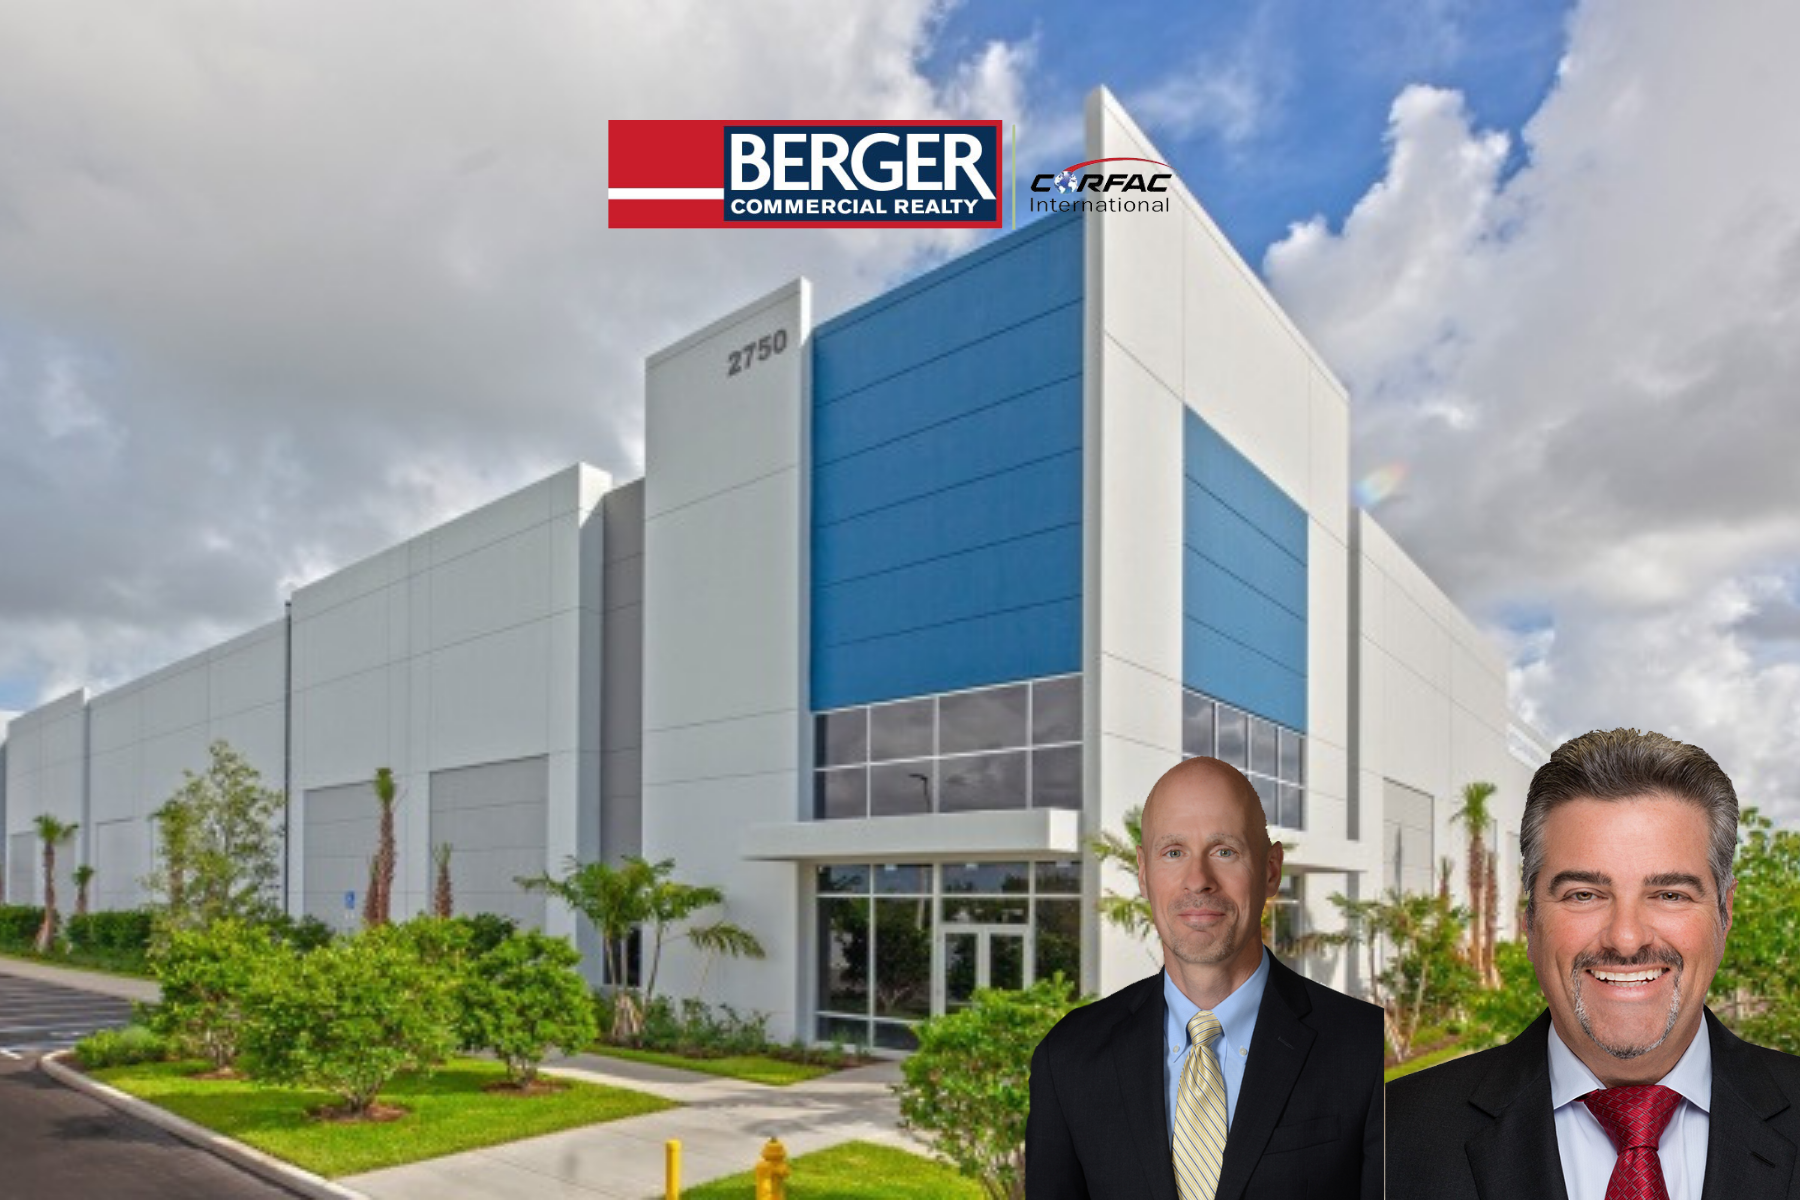 Berger Commercial Realty’s Keith Graves, CCIM, Joseph Byrnes  Ink Huge Lease Deal At Bridge Point 595